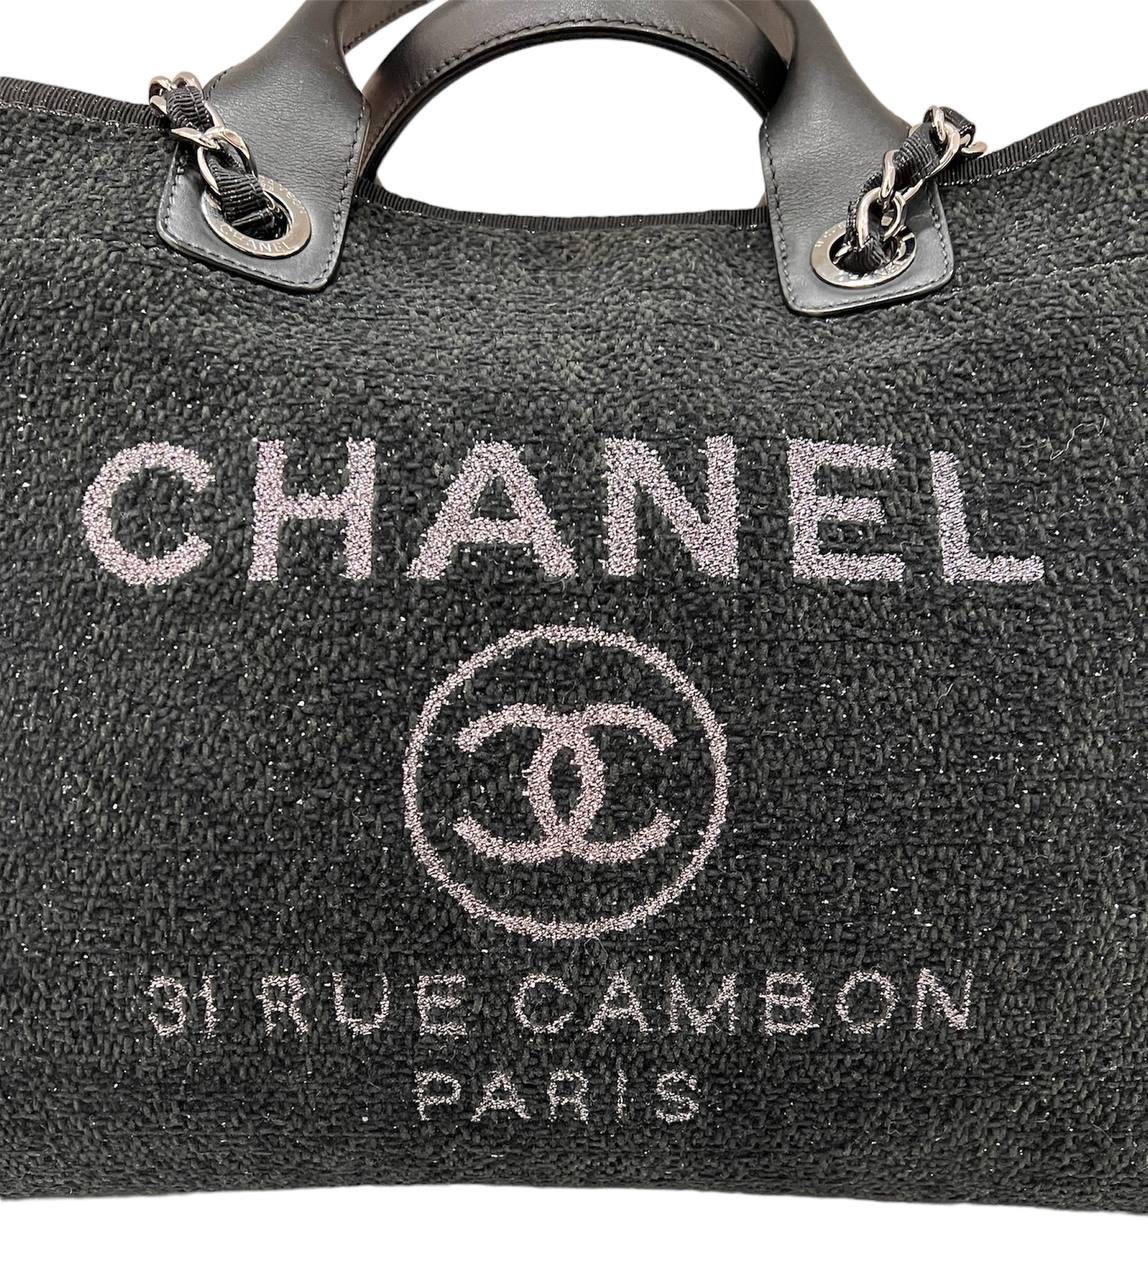 Chanel Deauville Tweed Nera Borsa A Spalla  In Excellent Condition For Sale In Torre Del Greco, IT